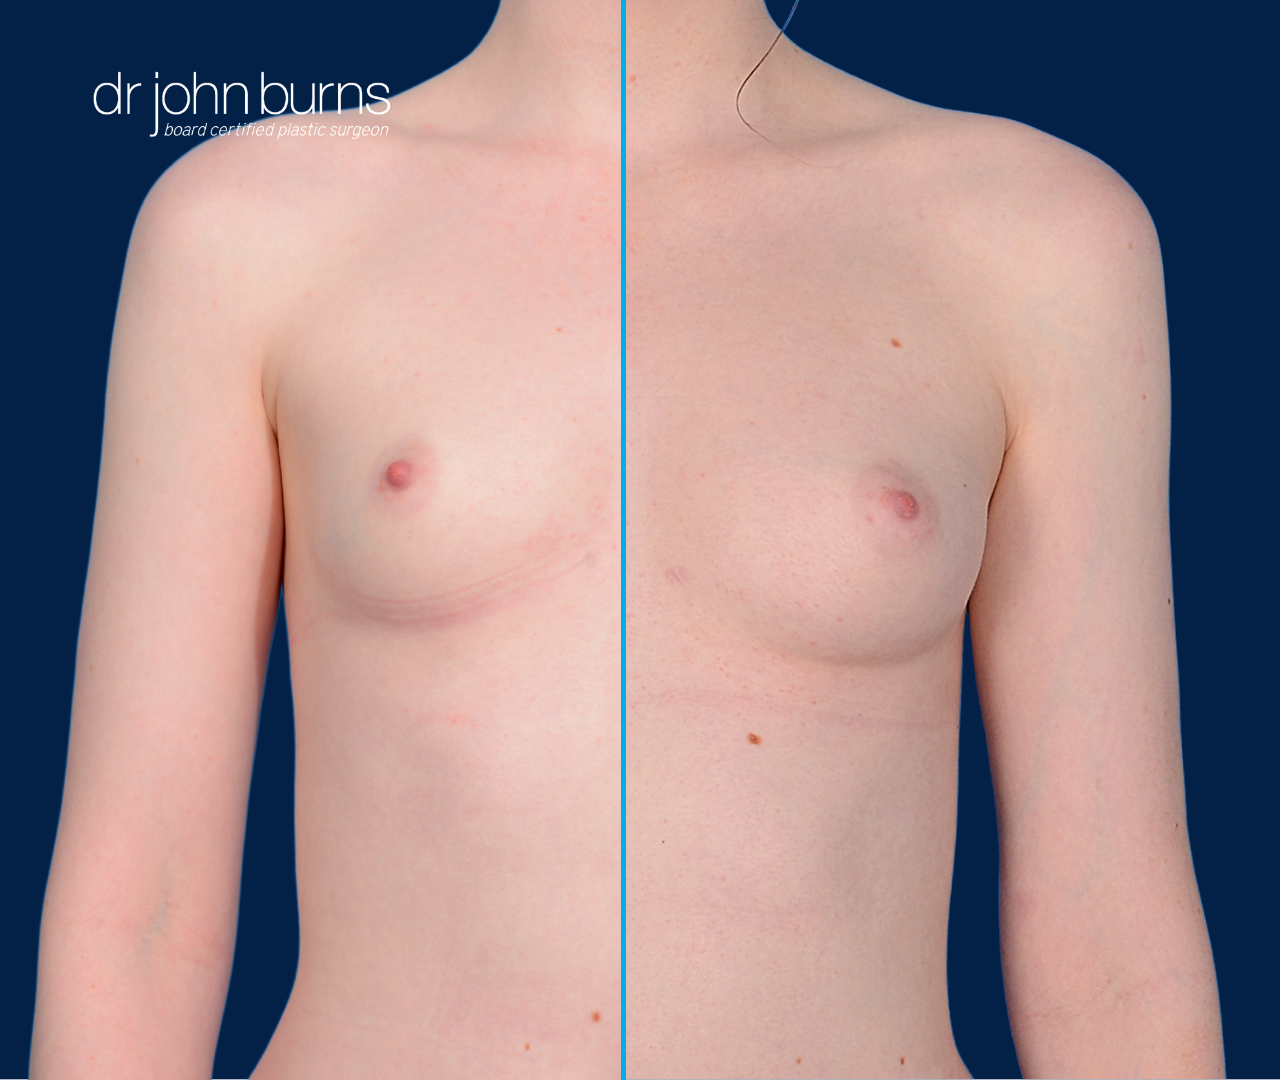 case 12- split screen before & after fat transfer to breast by top plastic surgeon, Dr. John Burns